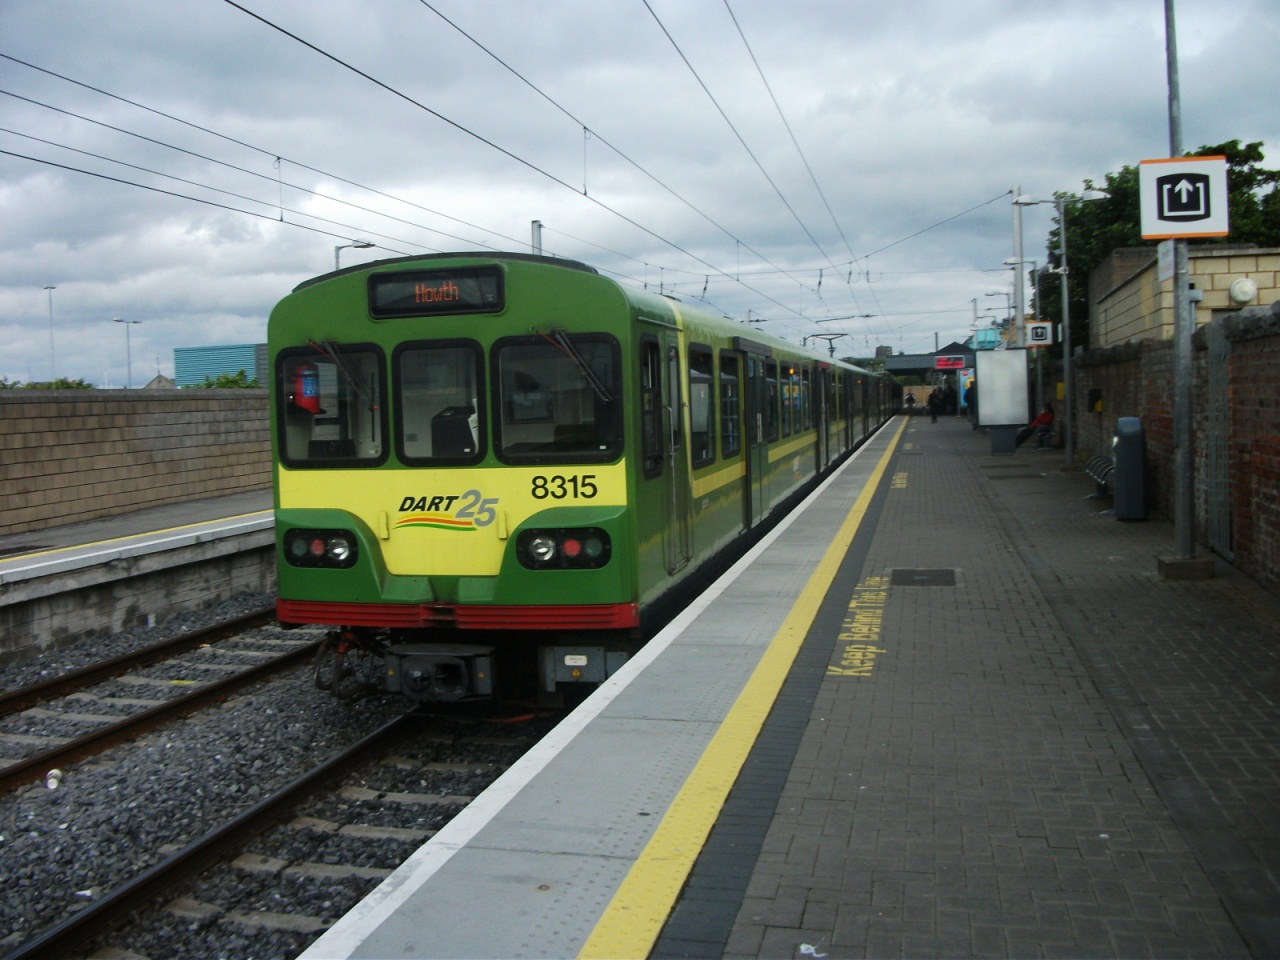 #11: Dublin Area Rapid Transit (DART) unit 8315 stands at Howth after its cross-city journey from Greystones.